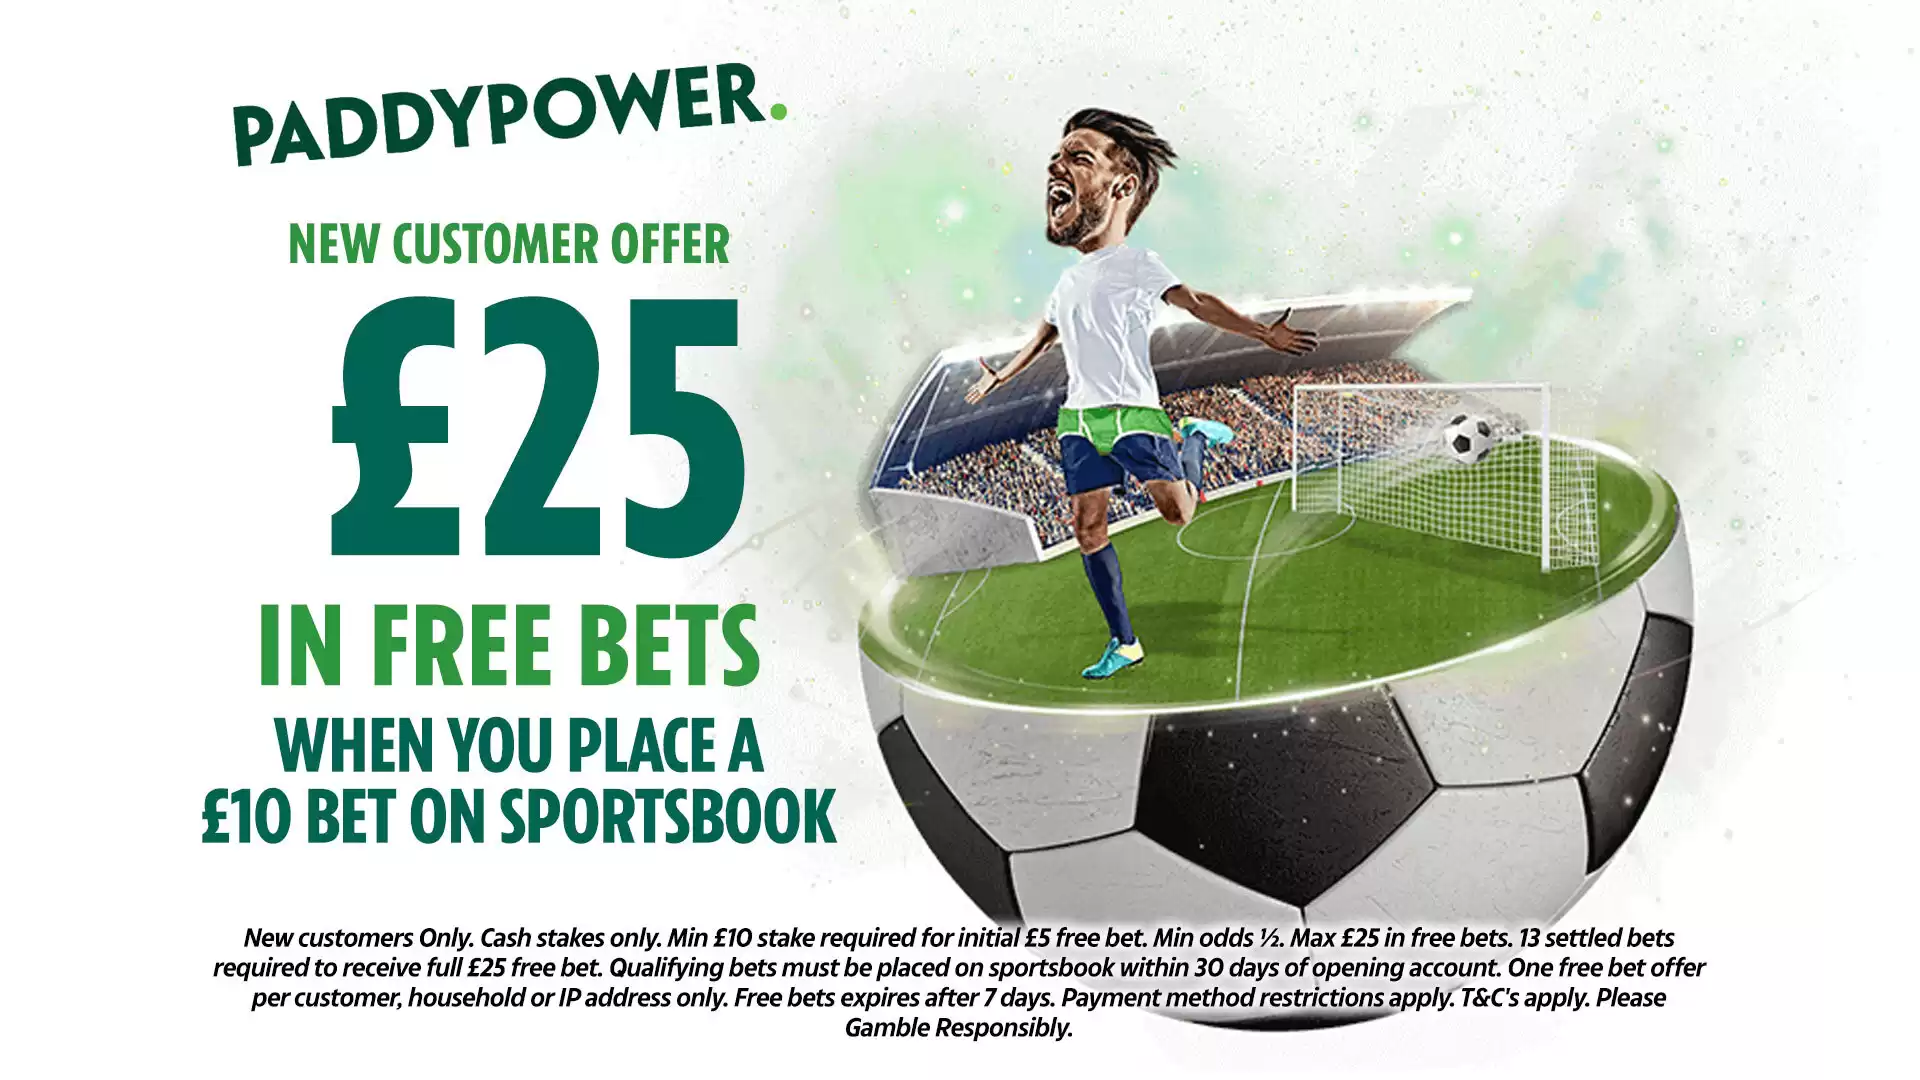 Juventus vs Real Madrid: Bet £10, Get £25 in Free Bets with Paddy Power